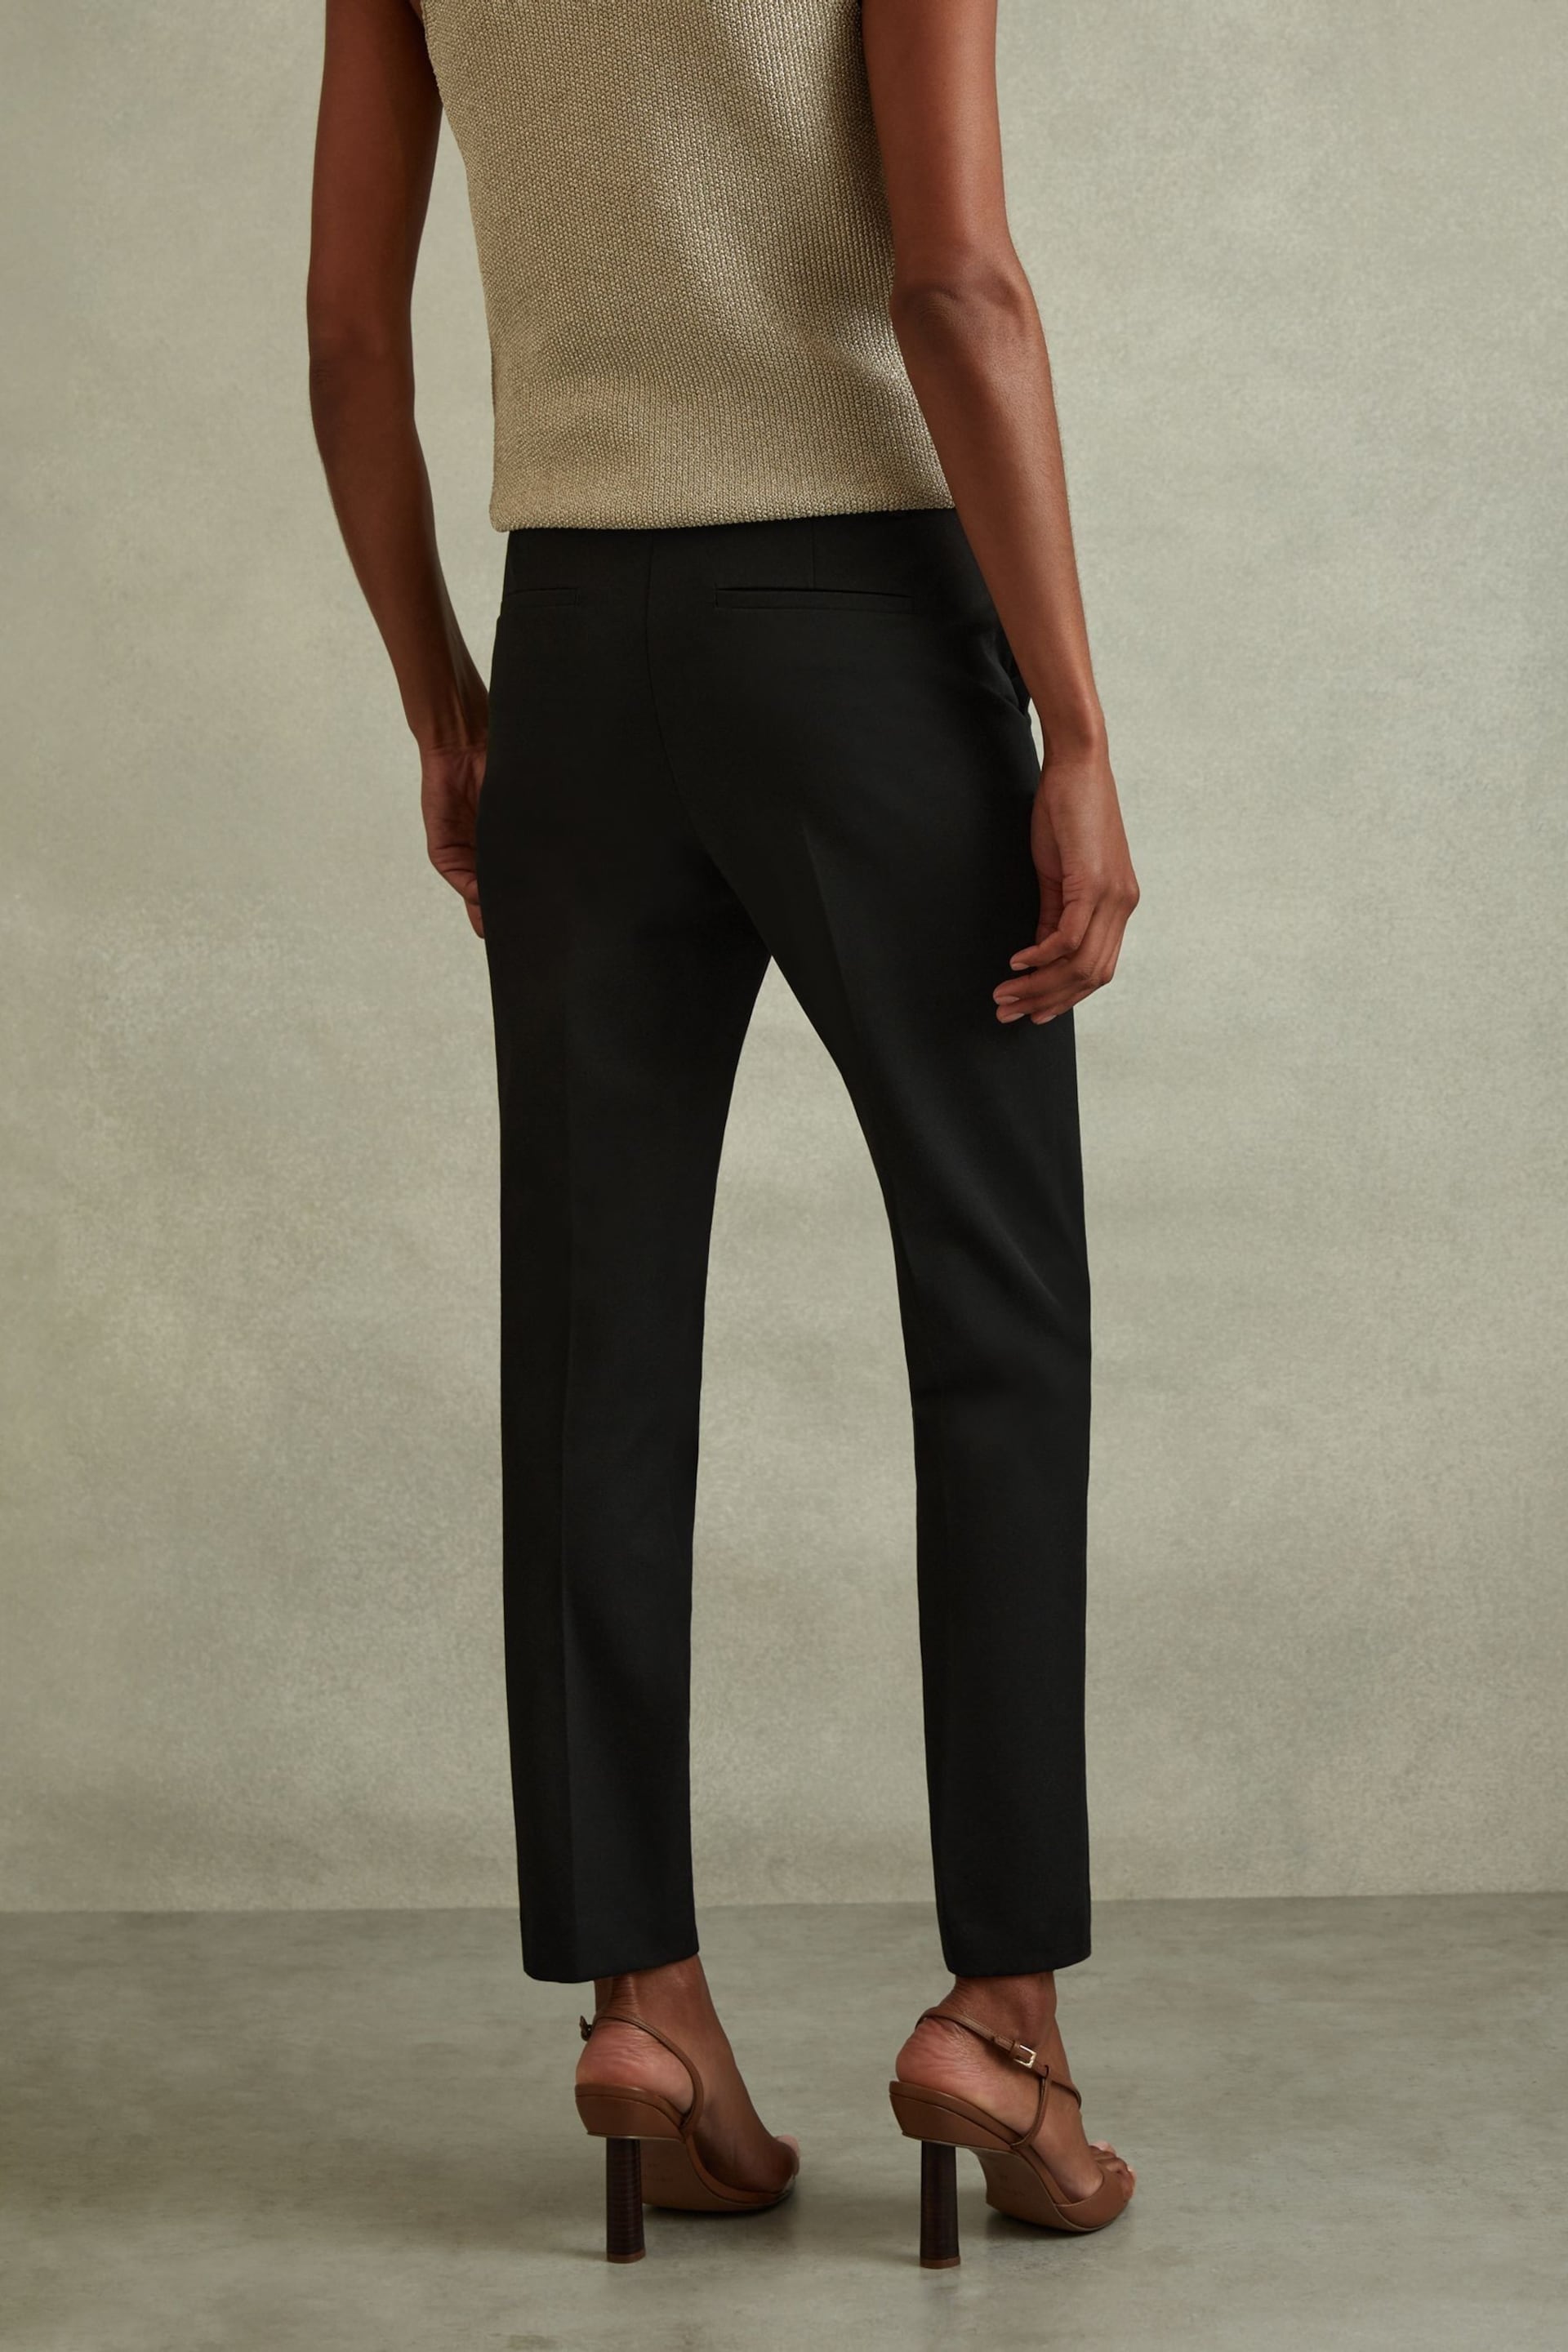 Reiss Black Joanne Slim Fit Tailored Trousers - Image 4 of 4